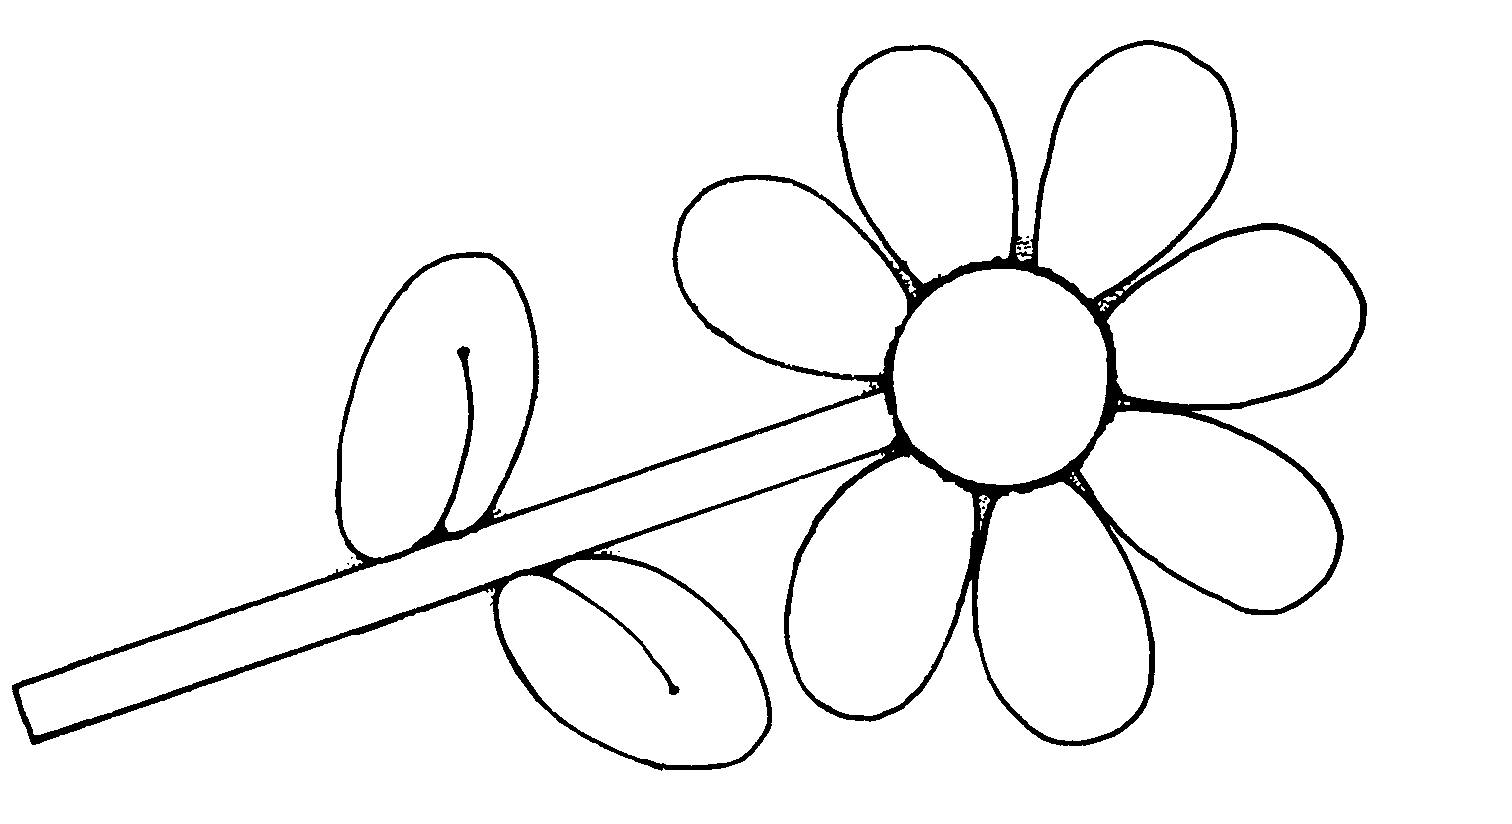 Free Flower Clipart Black And White, Download Free Flower Clipart Black